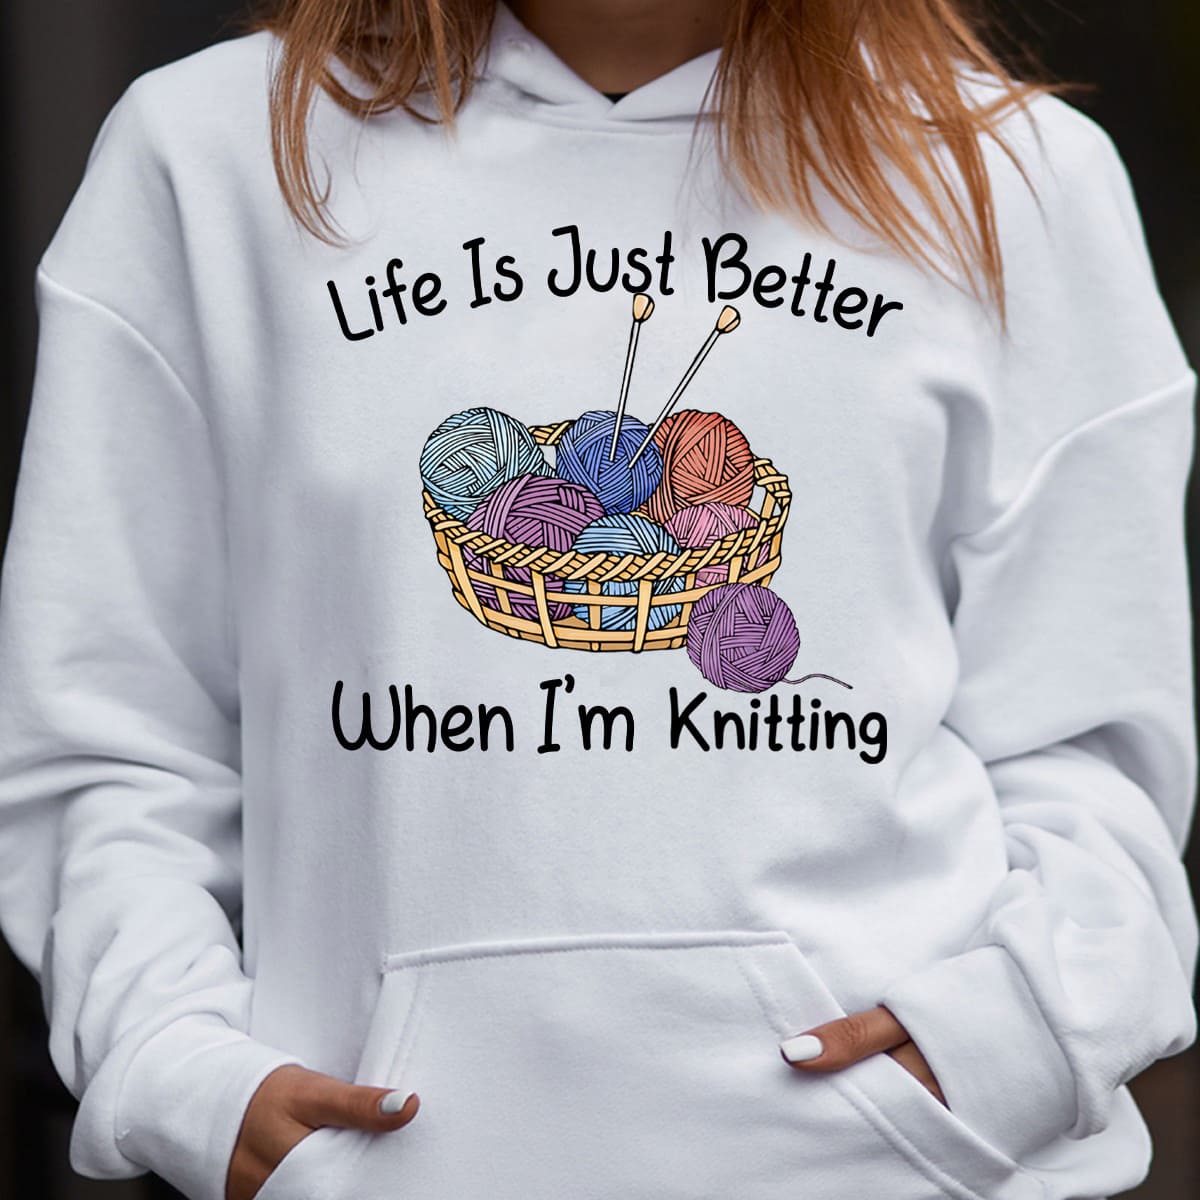 Life is just better when I'm knitting - Knitting people's life, better life with yarn